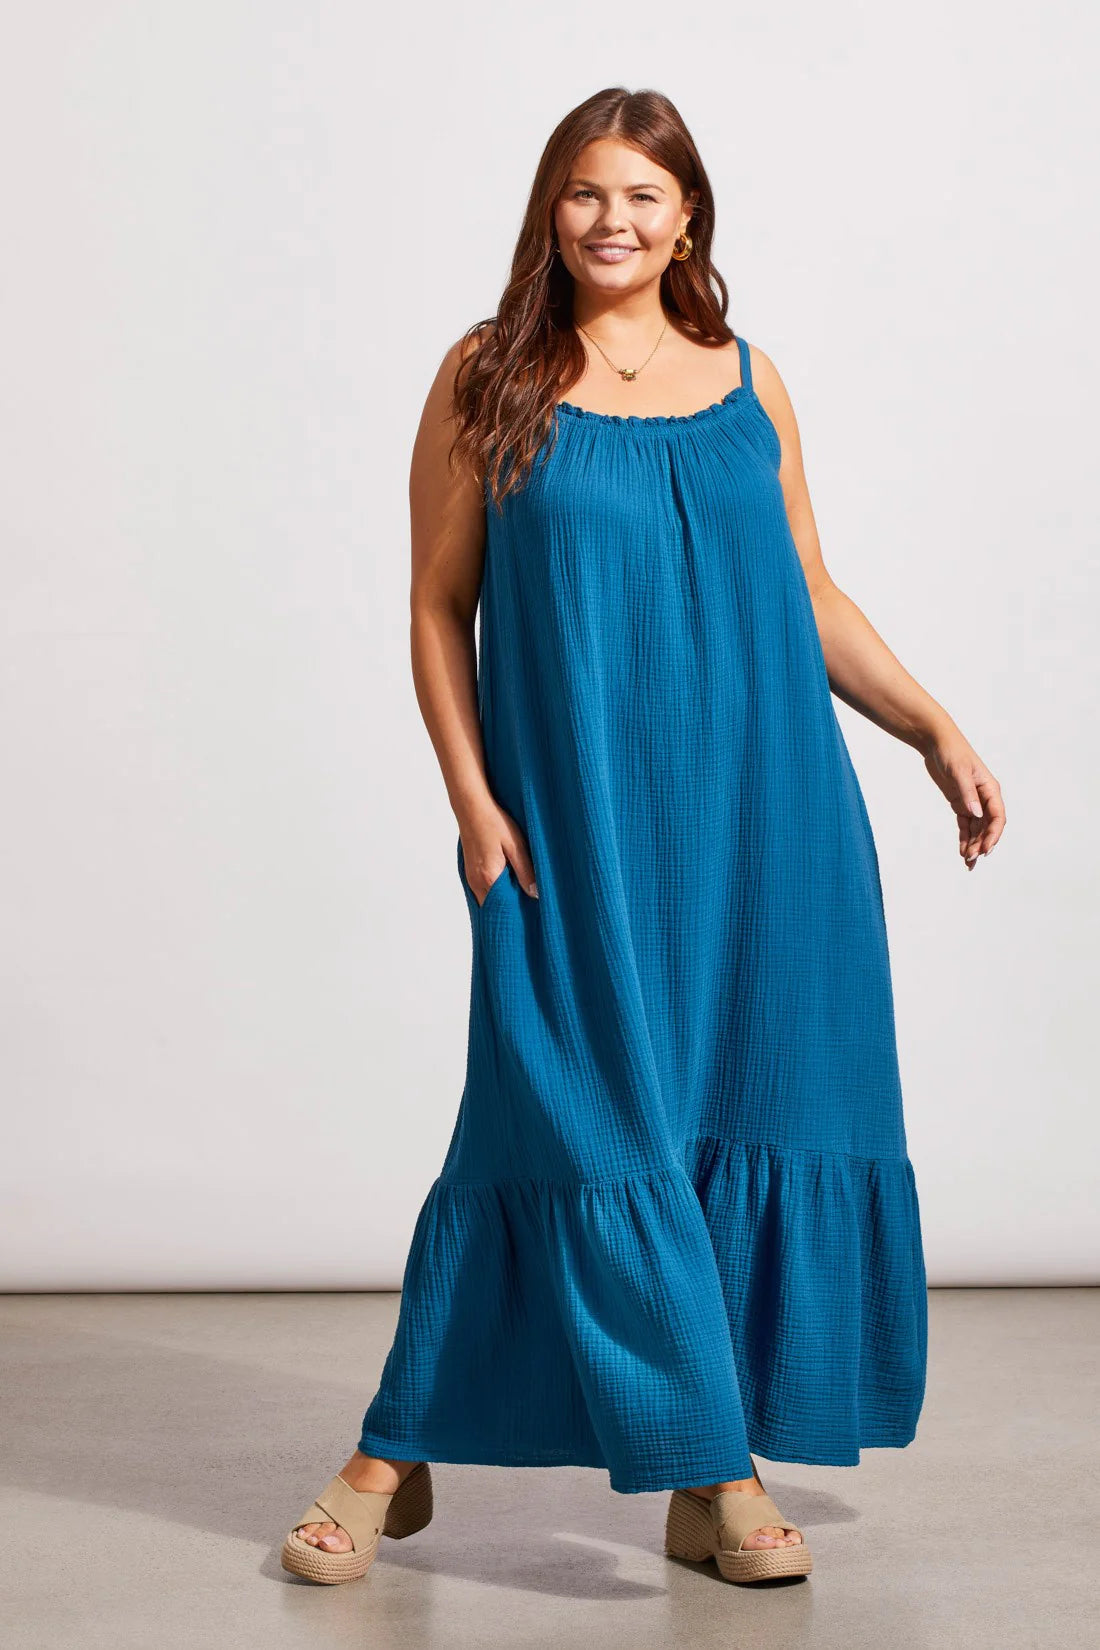 Polished and practical, this sleeveless maxi dress is a must-have addition to your closet. We're obsessed with the flowy fit cut from crinkled gauze cotton, rich colourway, scoop neckline with frilled details, and side seam pockets for stashing on-the-go items.